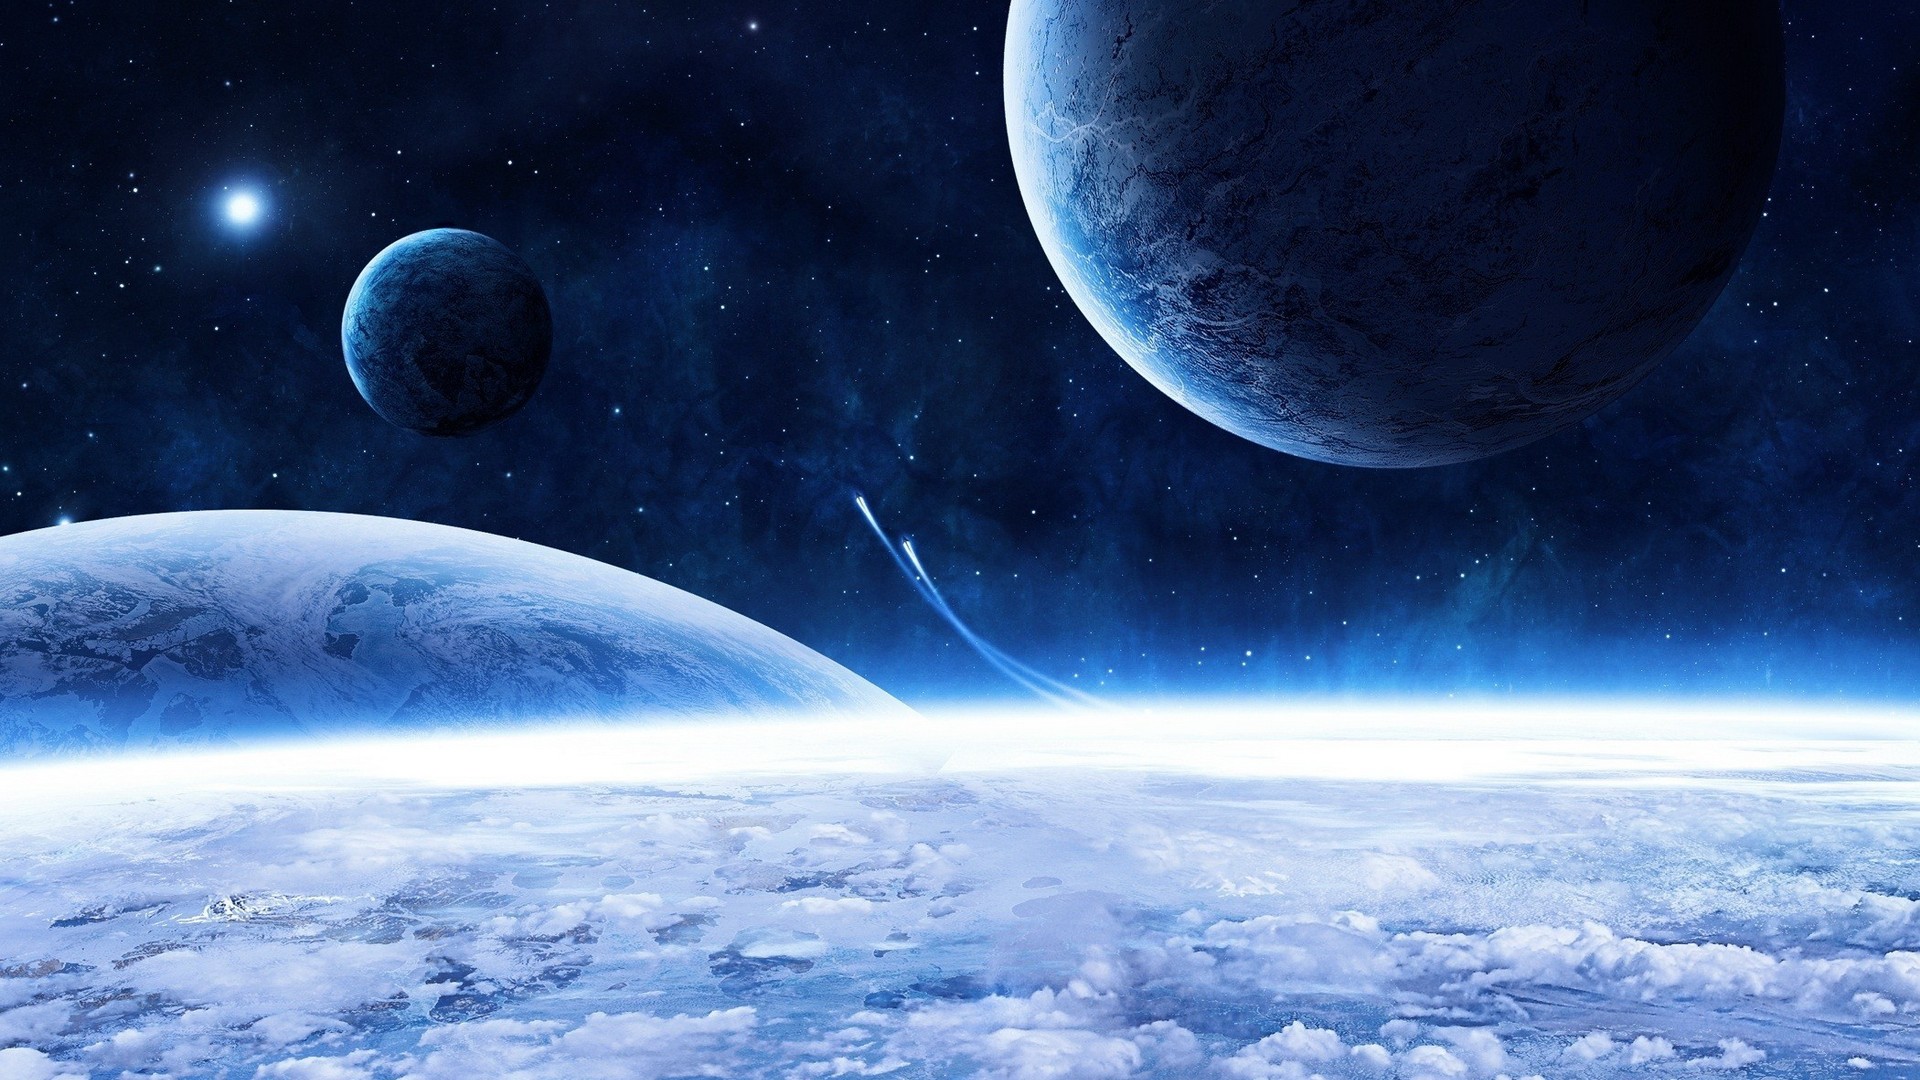 HD Space wallpaper ·① Download free cool High Resolution ...